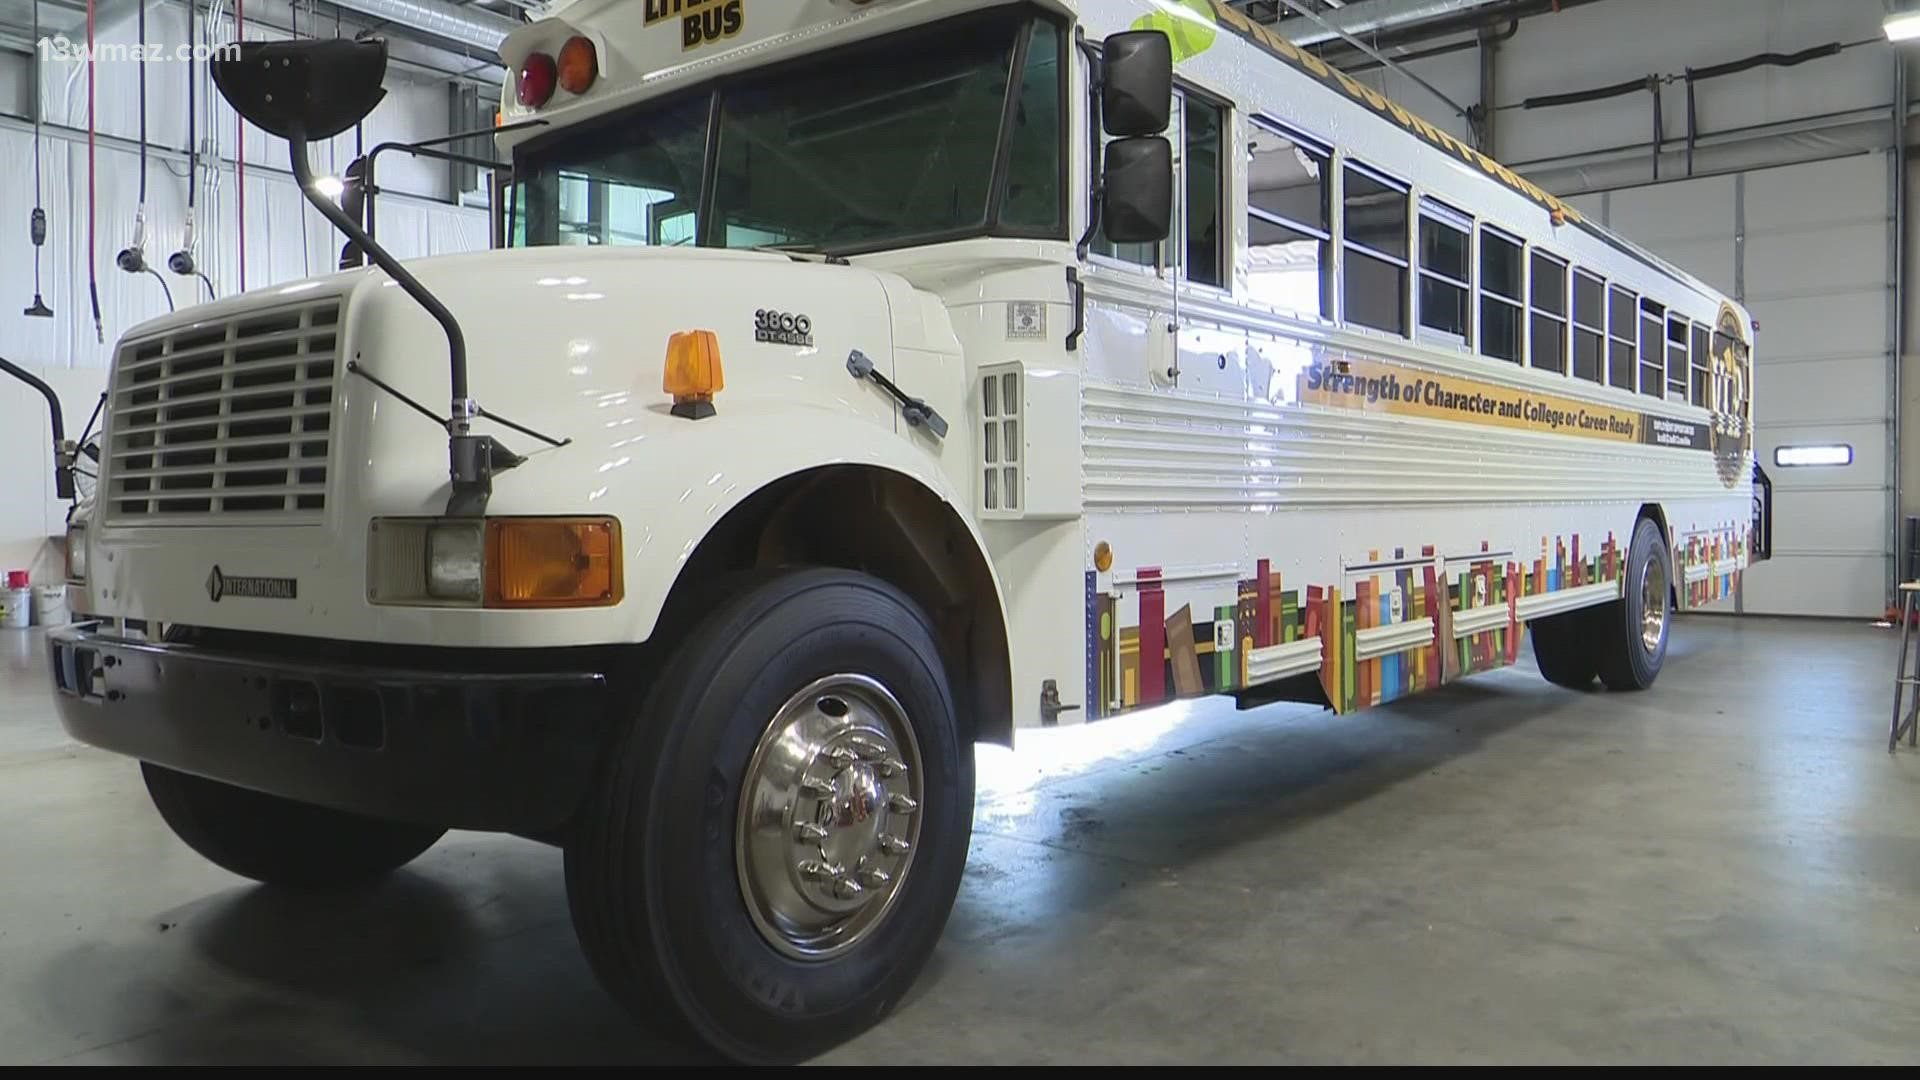 The district is looking to hire school bus drivers, hall monitors, and school nutritionists